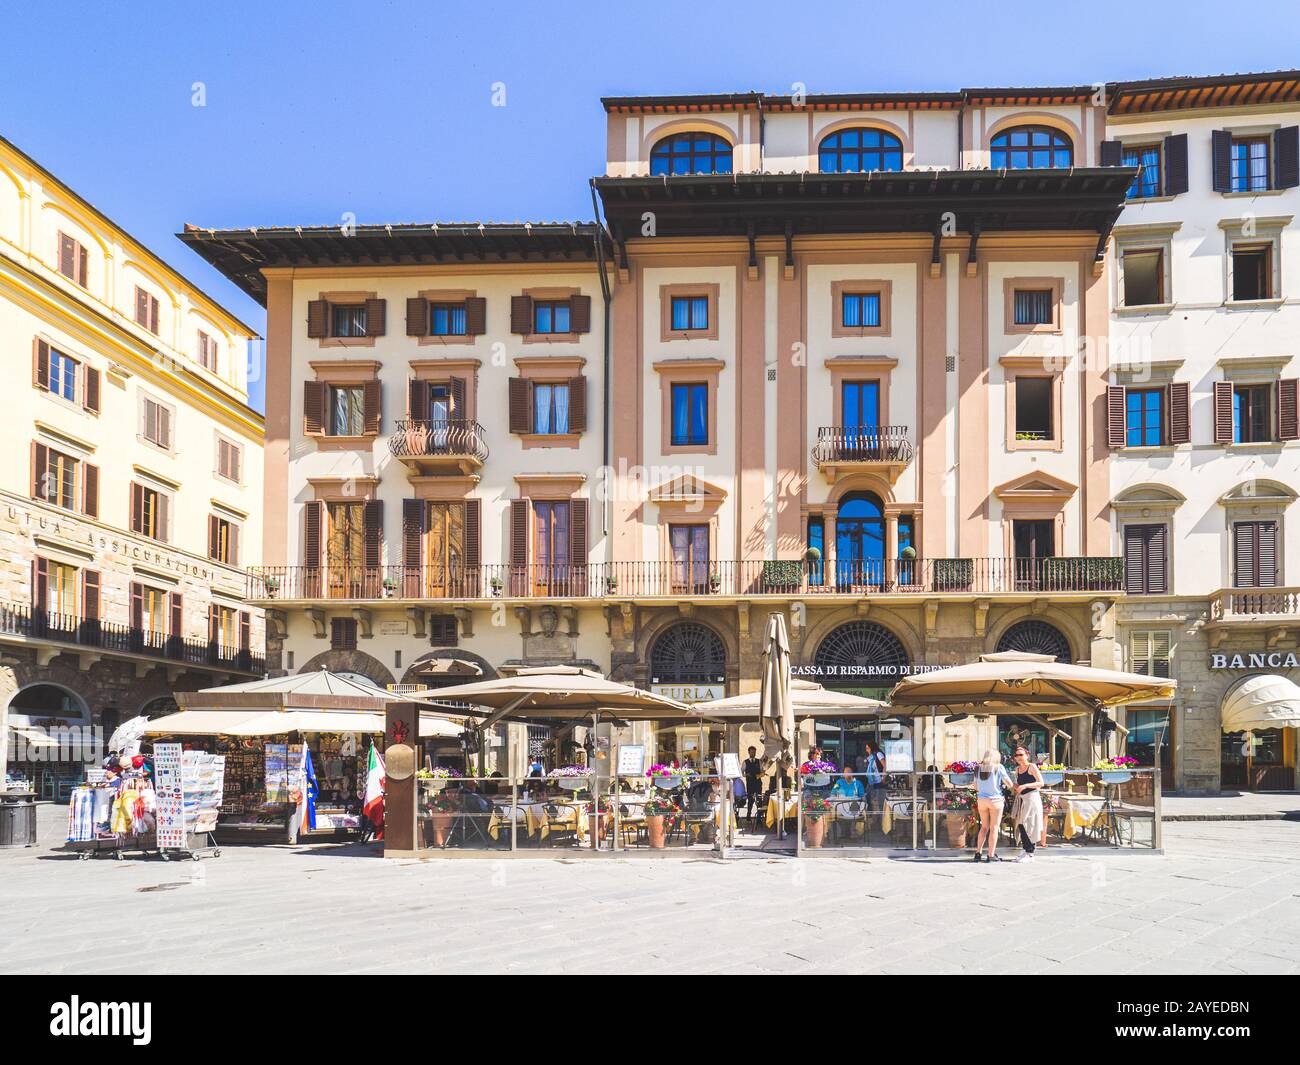 Firenze, Italy - May 27, 2017 - Views of the Tourists enjoying in the Perseo bar in the Piazza della Signoria Stock Photo